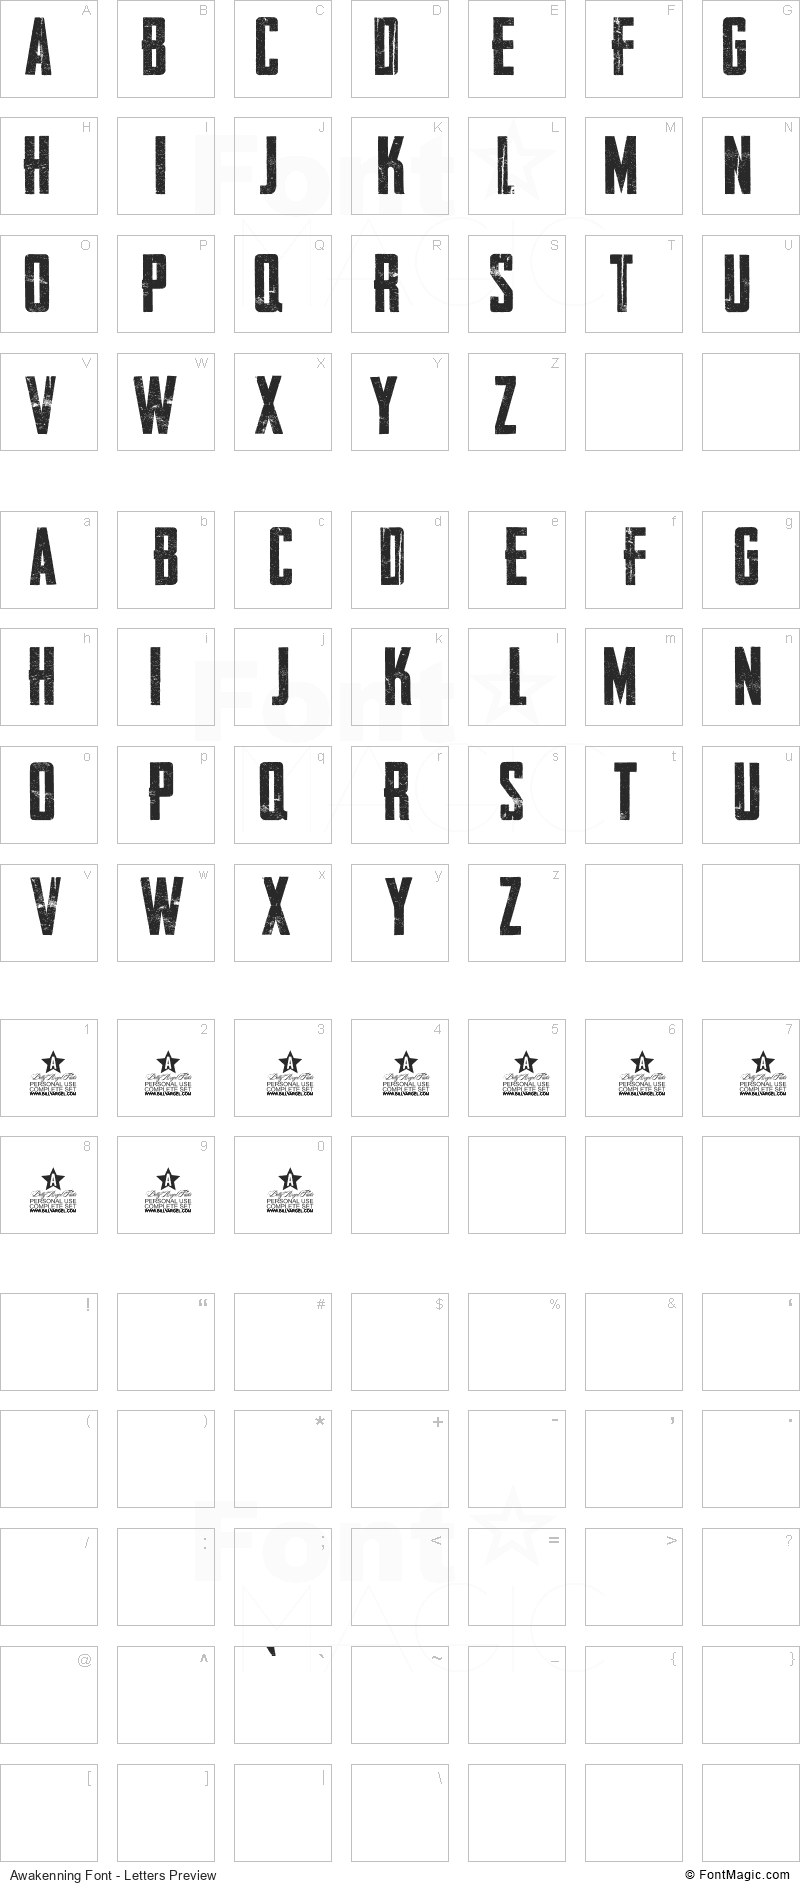 Awakenning Font - All Latters Preview Chart